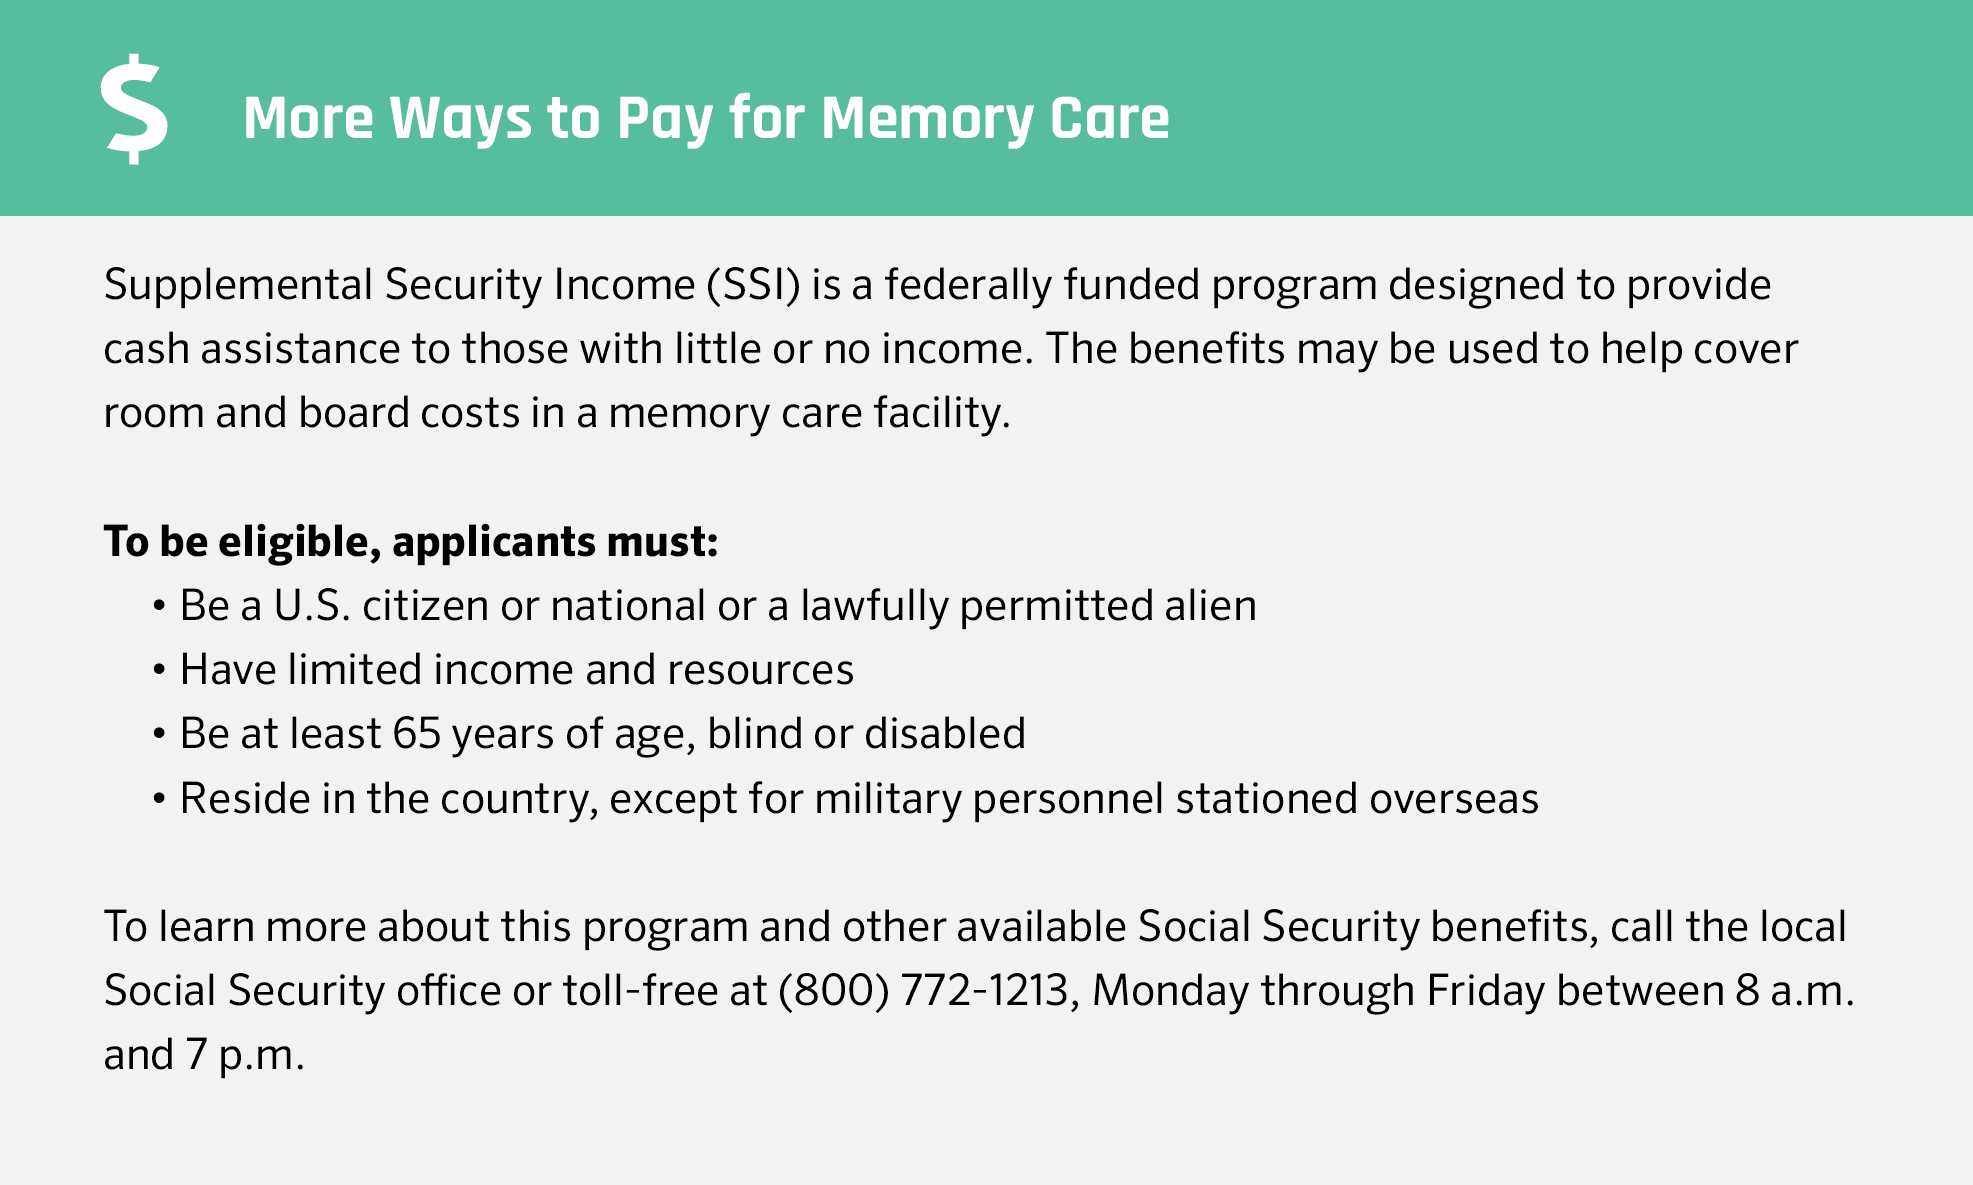 More ways to pay for Memory Care in Georgia